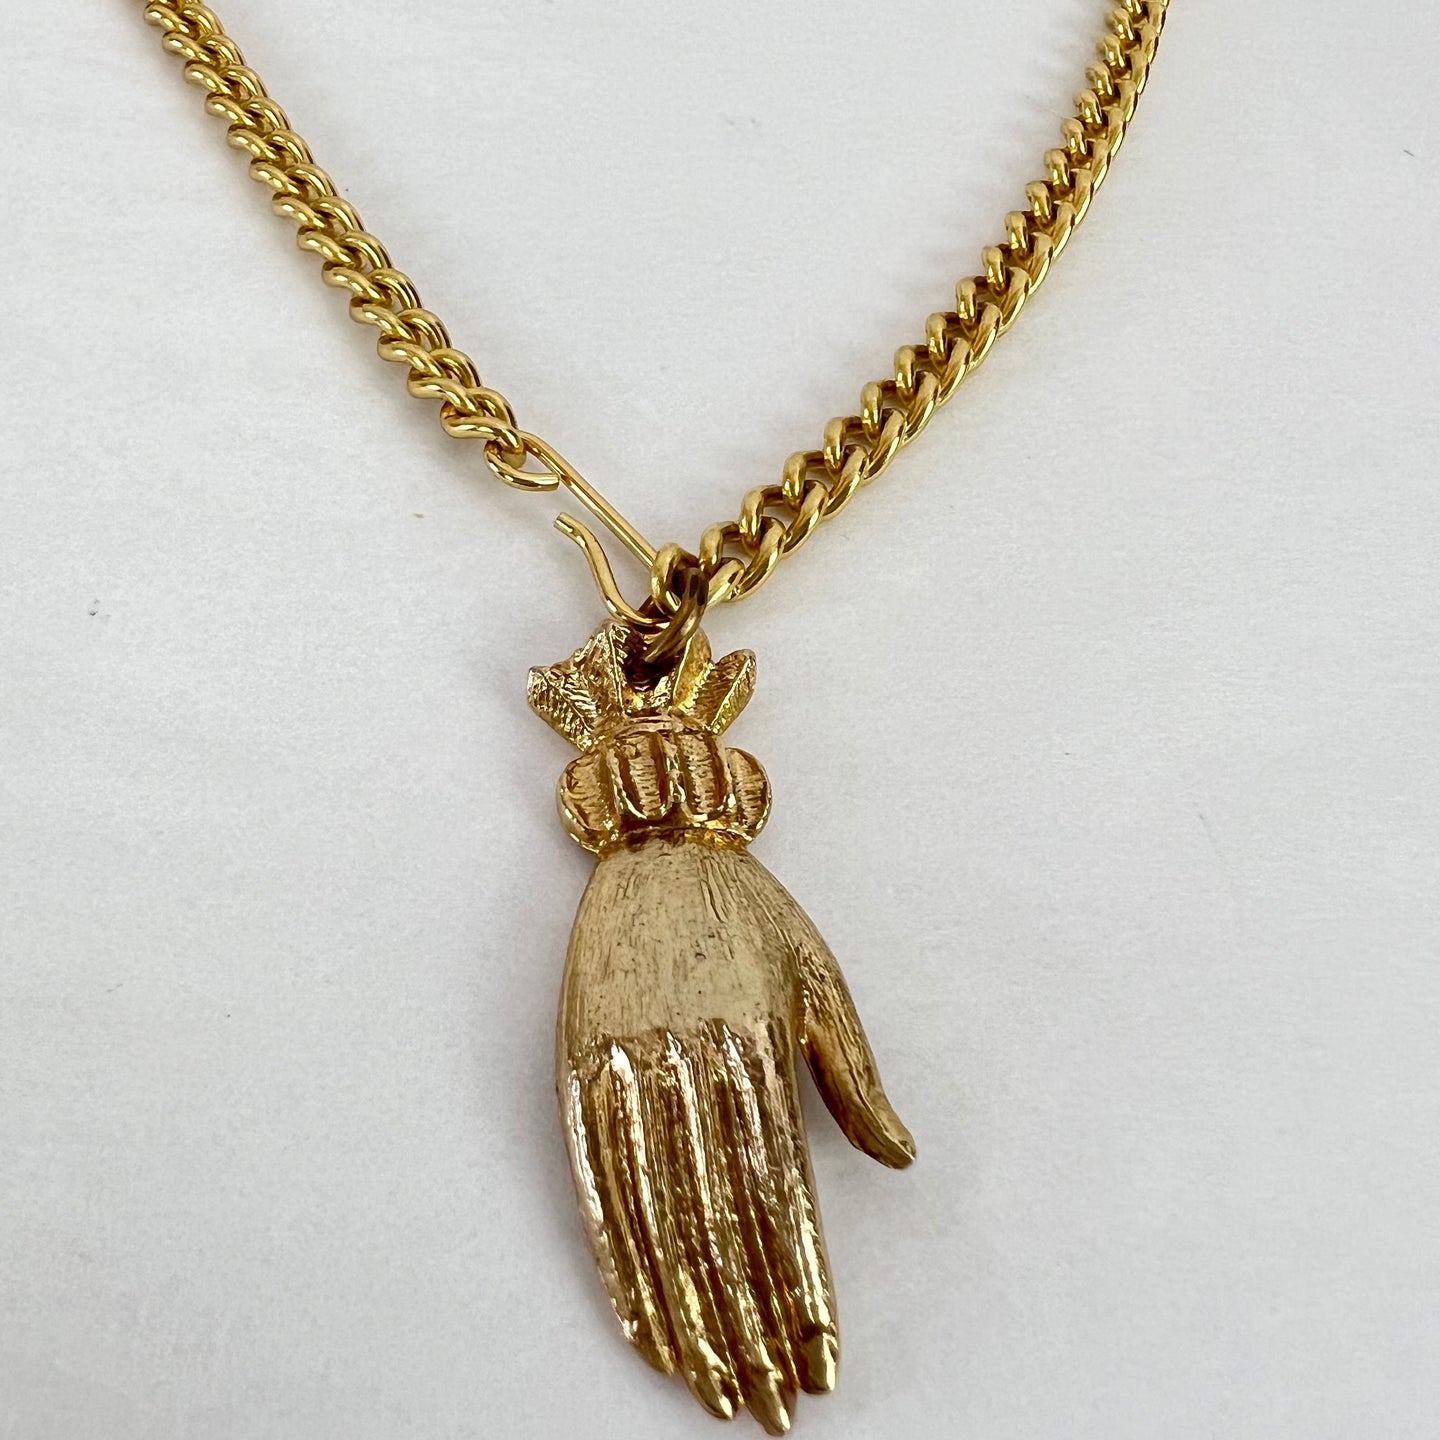 Gold Hand Pendant Necklace